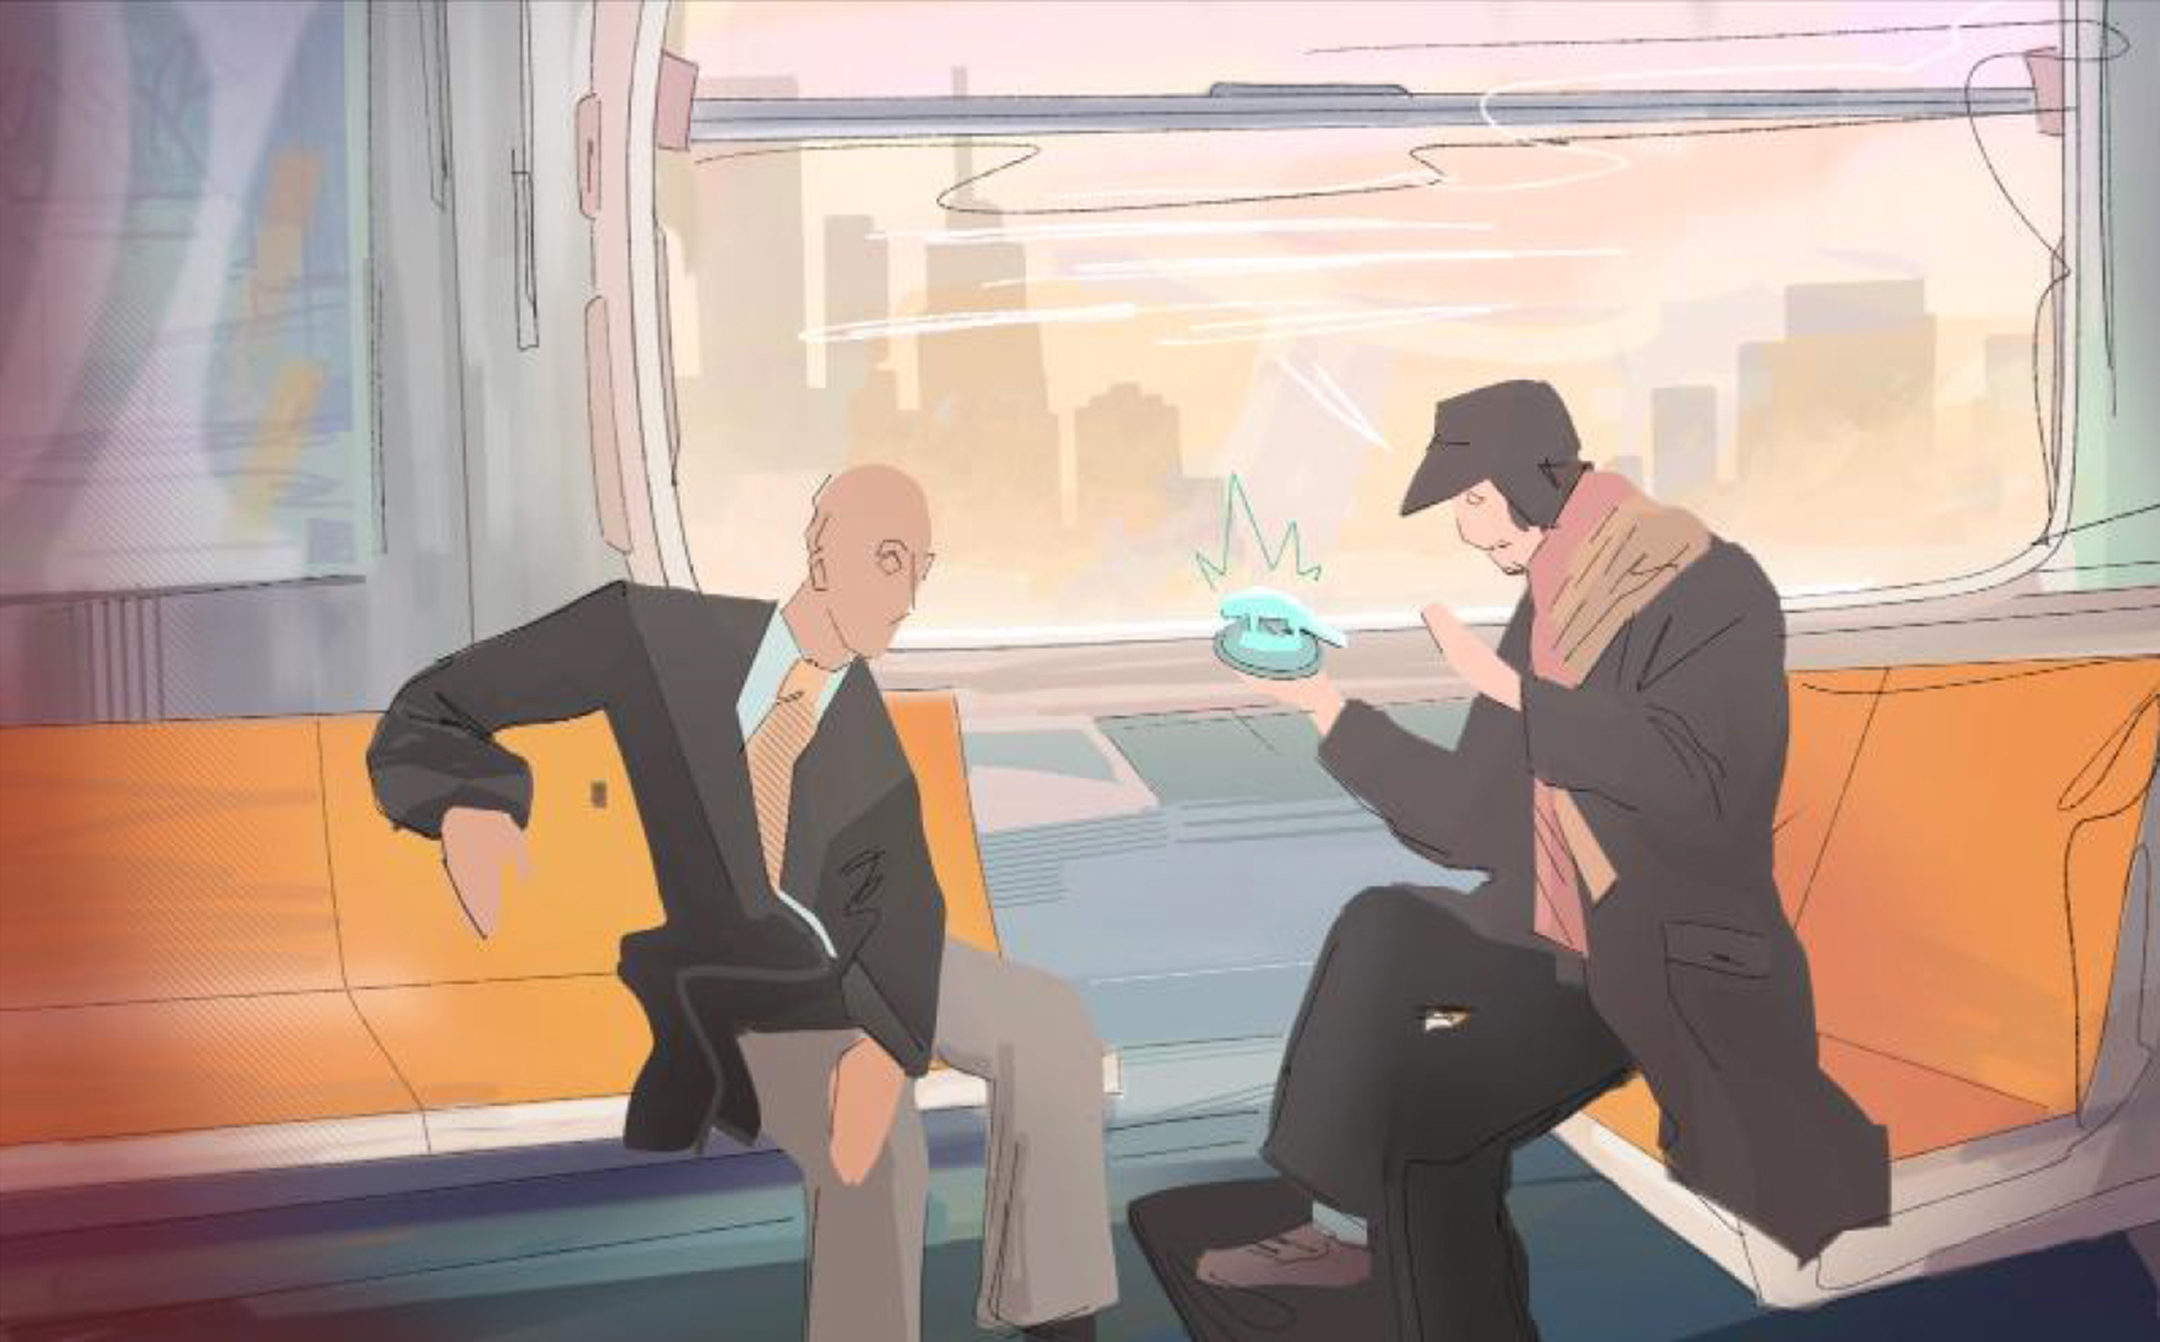 digital illustration depicting two men sitting on a subway looking at a handheld hologram held by the man on the right